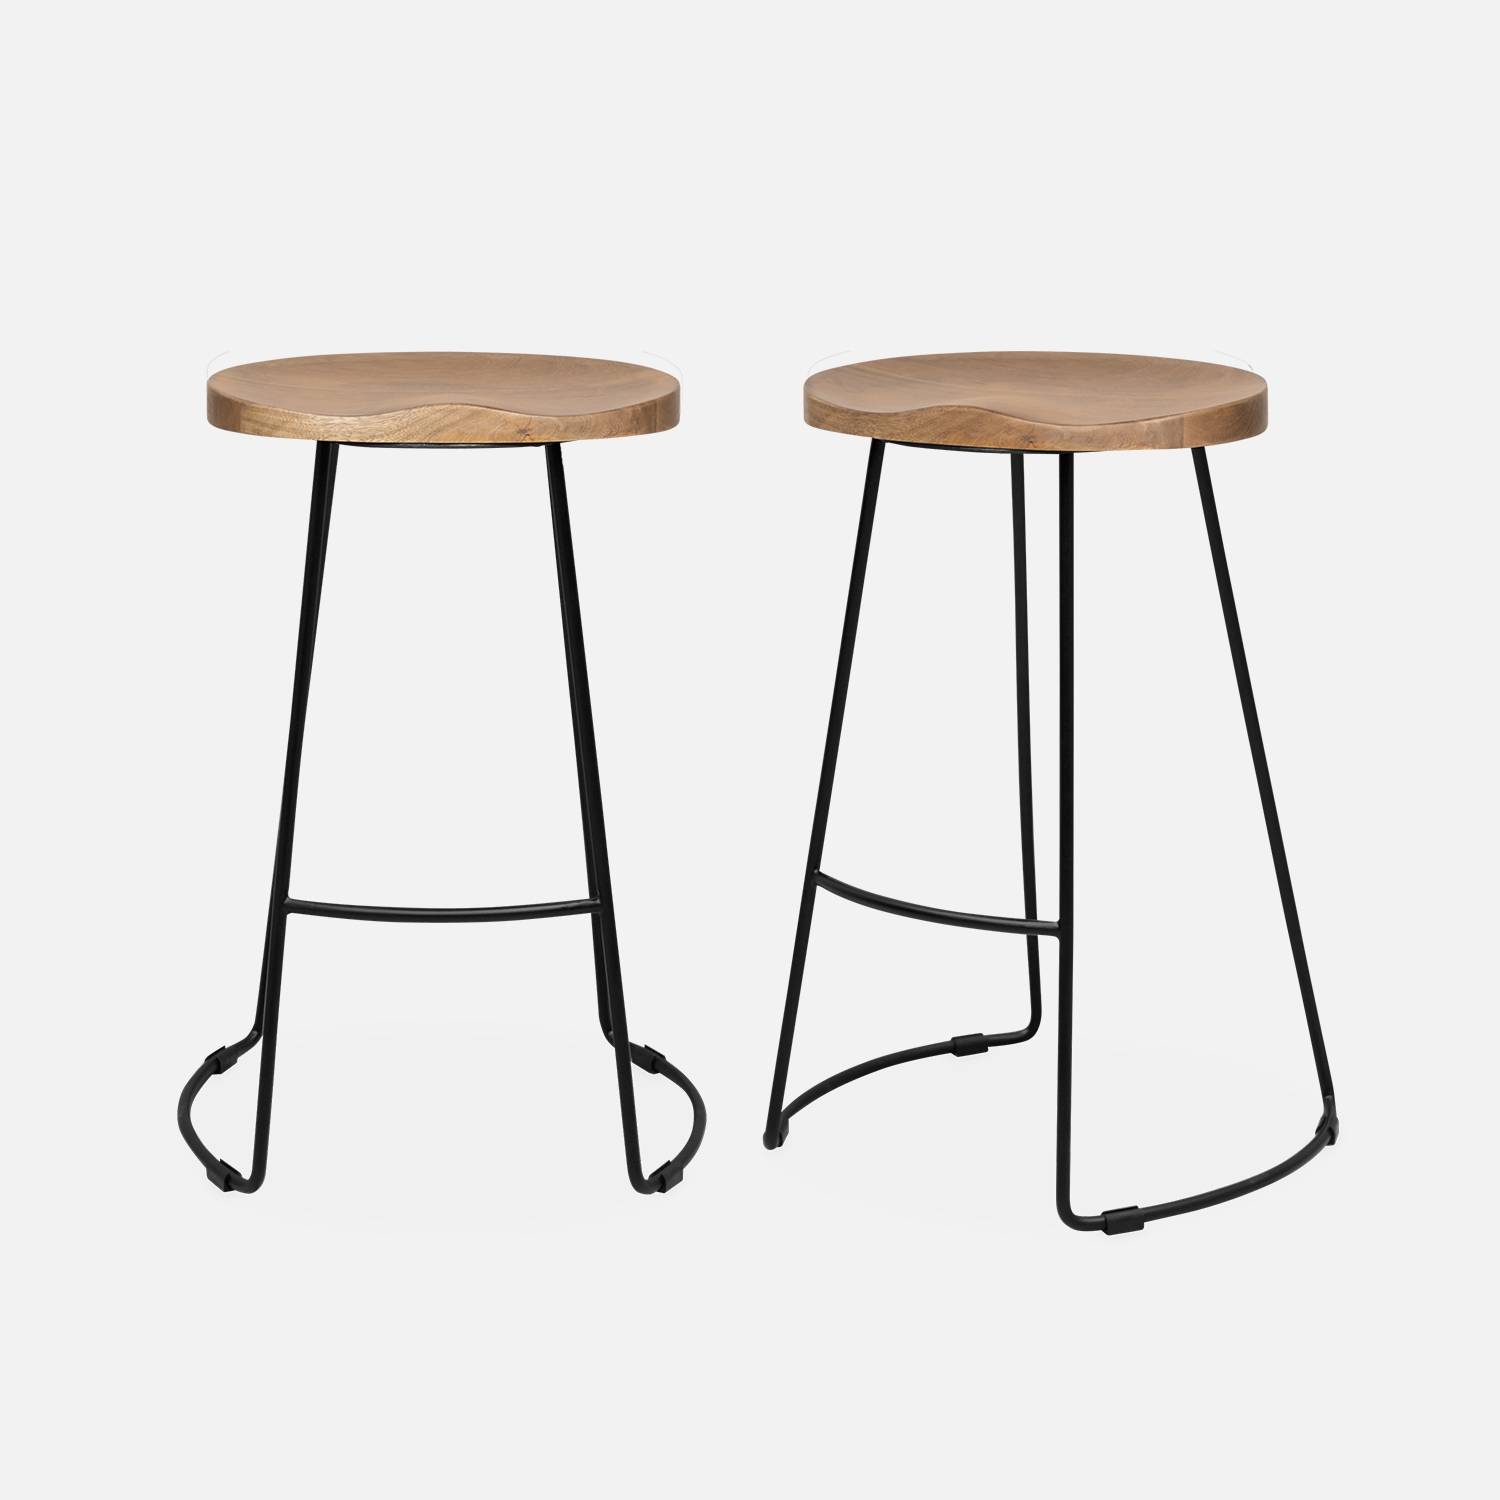 Pair of industrial metal and wooden bar stools, 44x36x65cm, Natural | sweeek